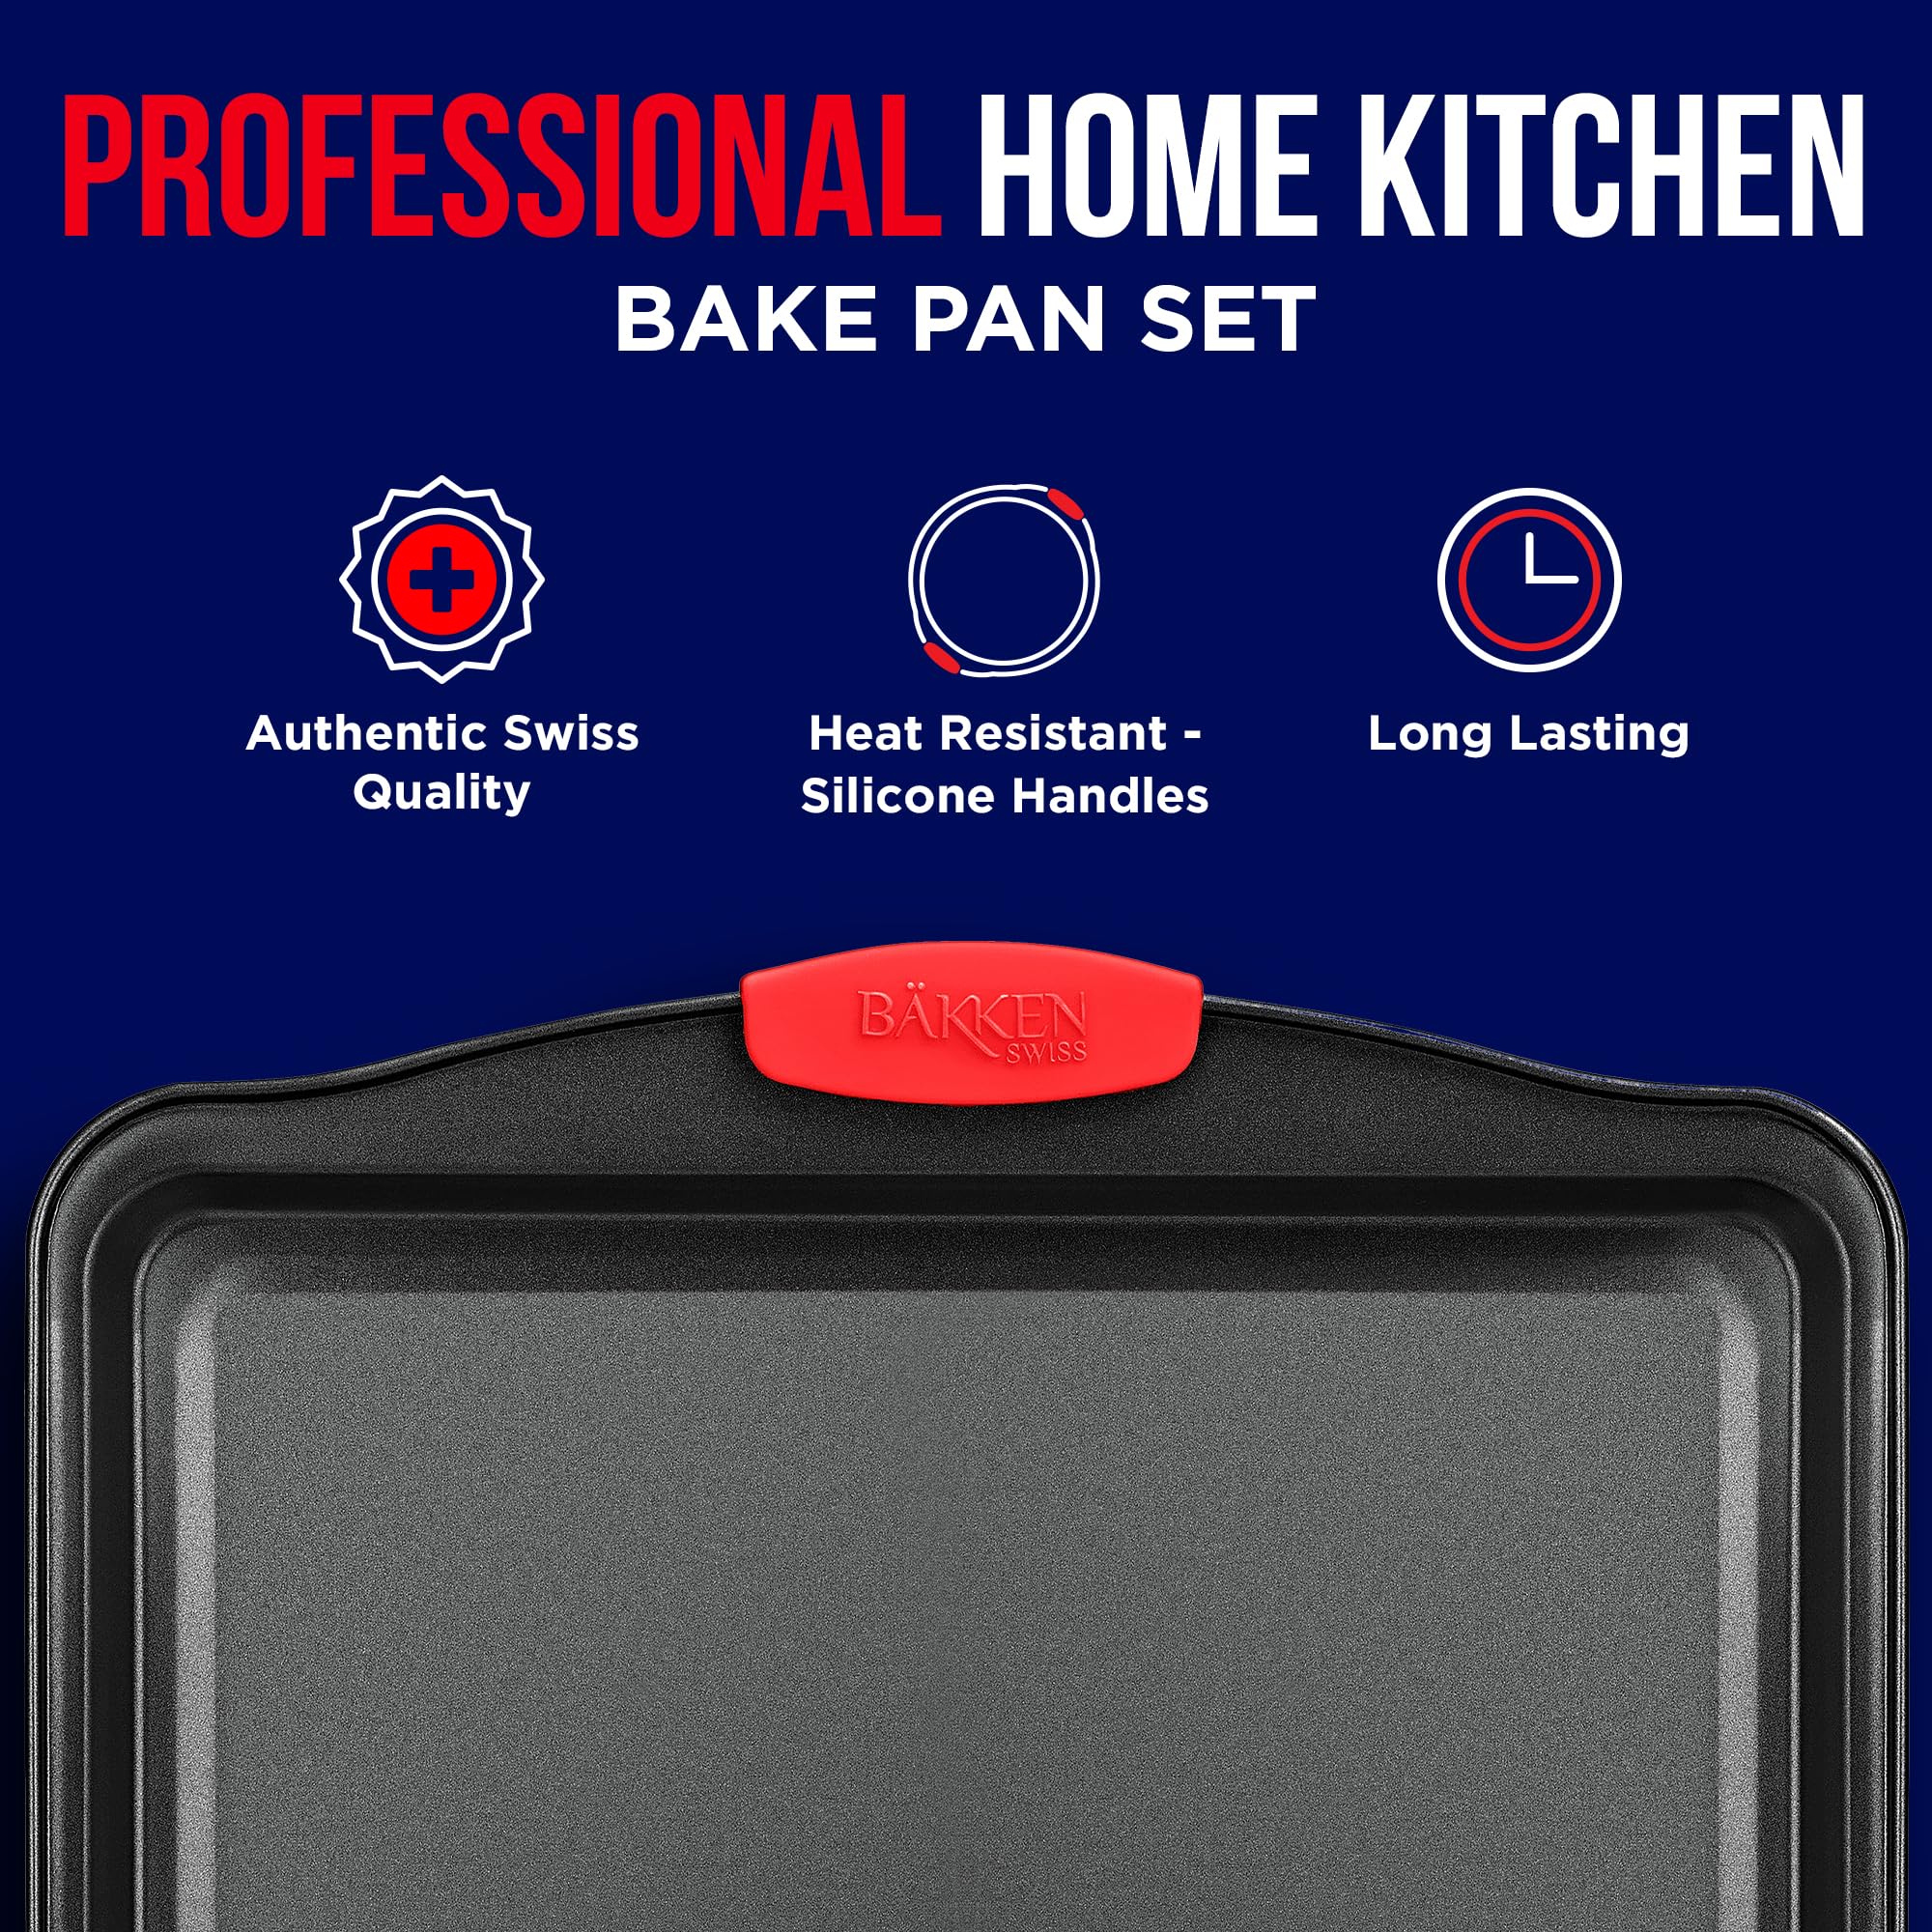 2 Piece Set Nonstick Carbon Steel Oven Bakeware -Professional Quality Kitchen Cooking Baking Trays -PFOA, PFOS, PTFE-Free Small & MediumBaking Sheet Pans with Red Silicone Handles